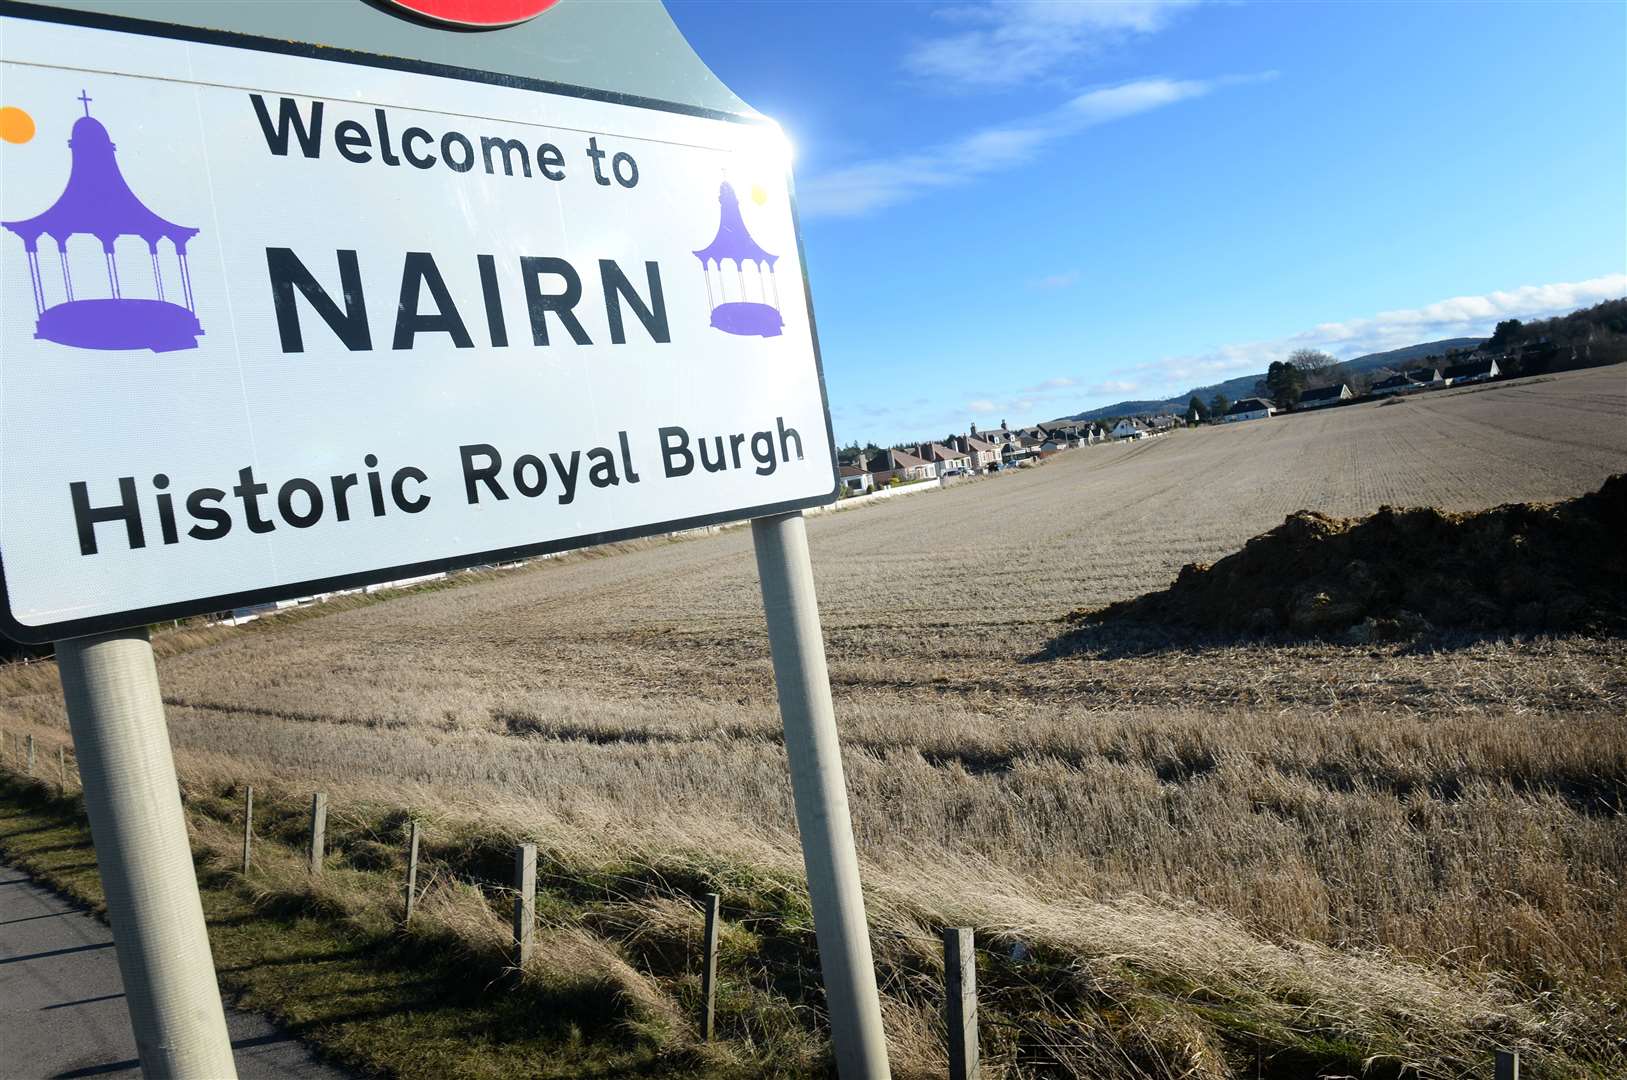 Traffic could be restricted in part of Nairn. .